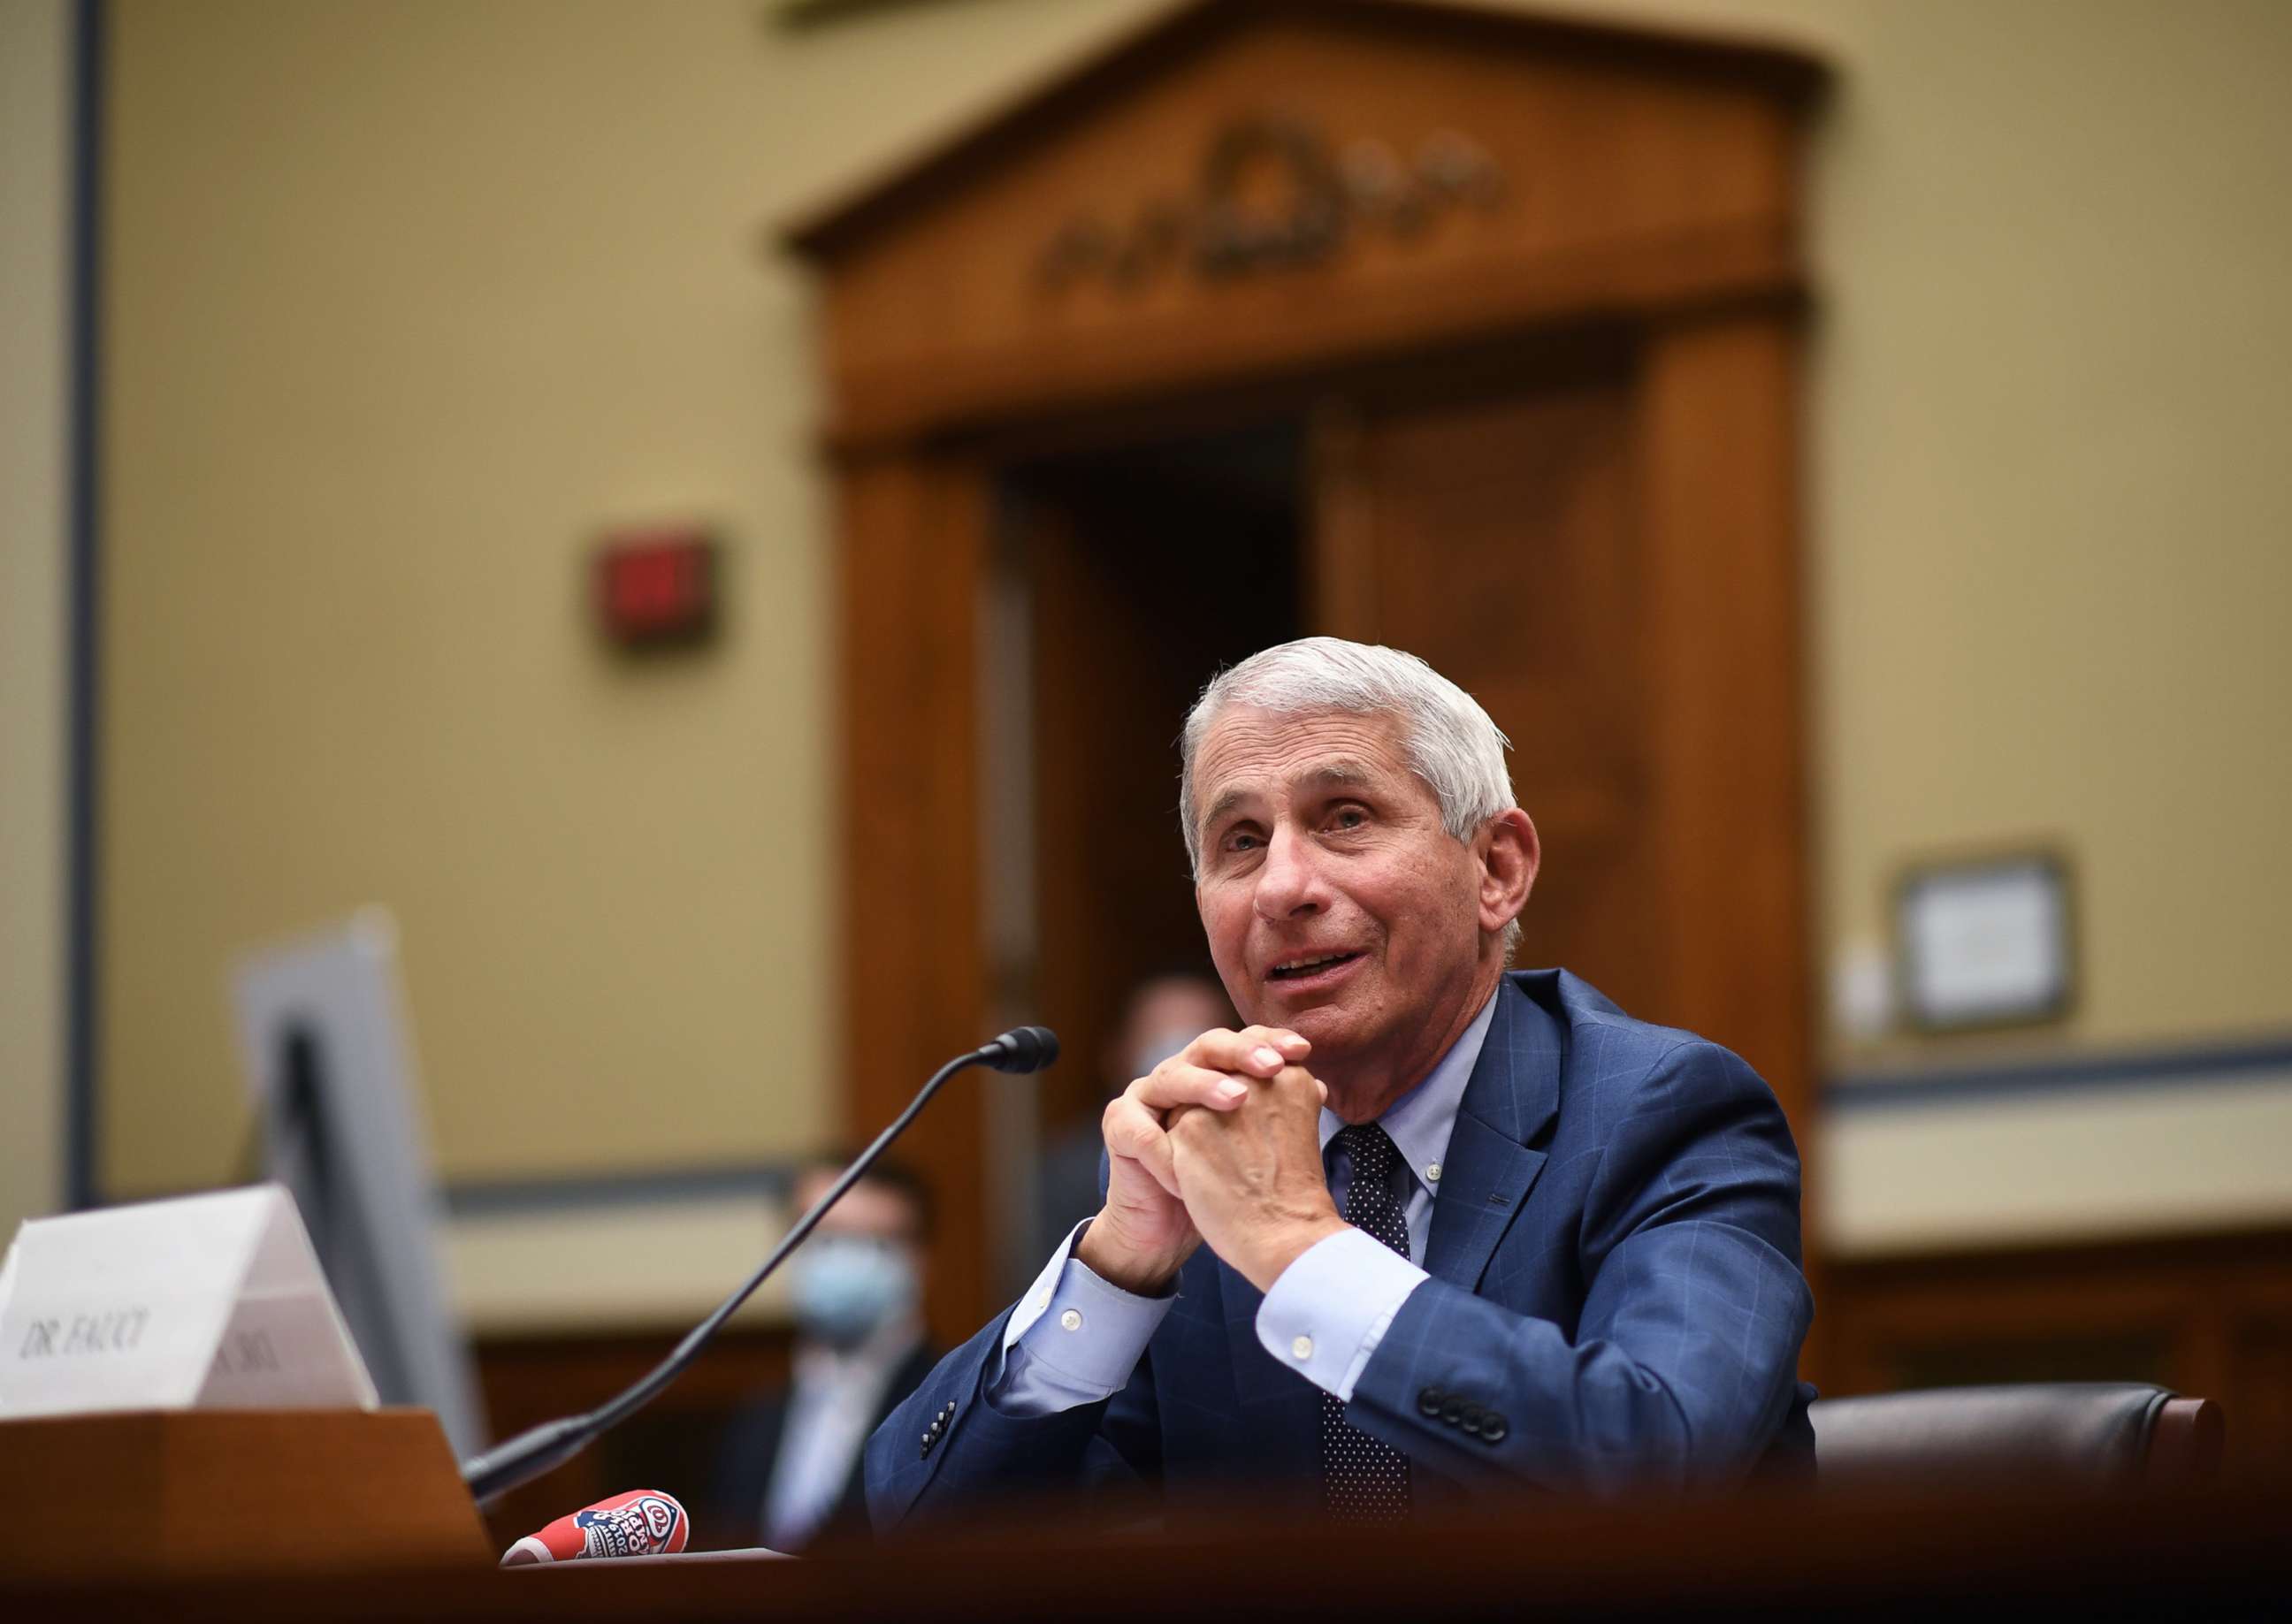 PHOTO: Dr. Anthony Fauci, director of the National Institute for Allergy and Infectious Diseases, testifies before a House Subcommittee on the Coronavirus crisis, July 31, 2020 in Washington, D.C.